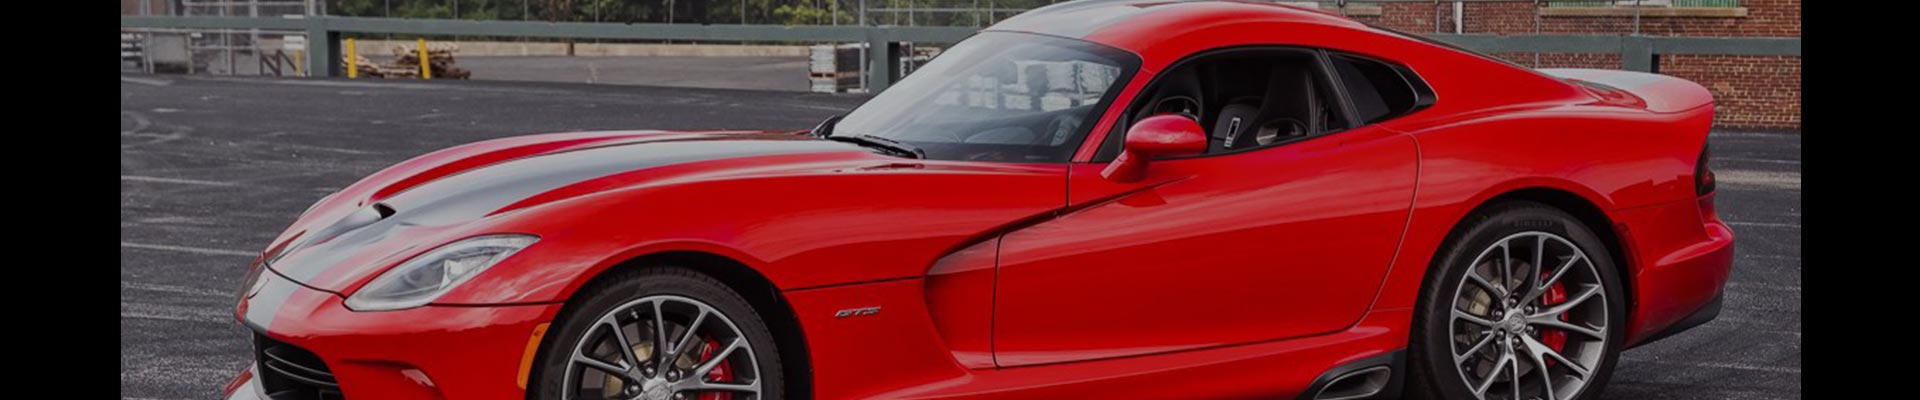 Shop Replacement and OEM 2000 Dodge Viper Parts with Discounted Price on the Net